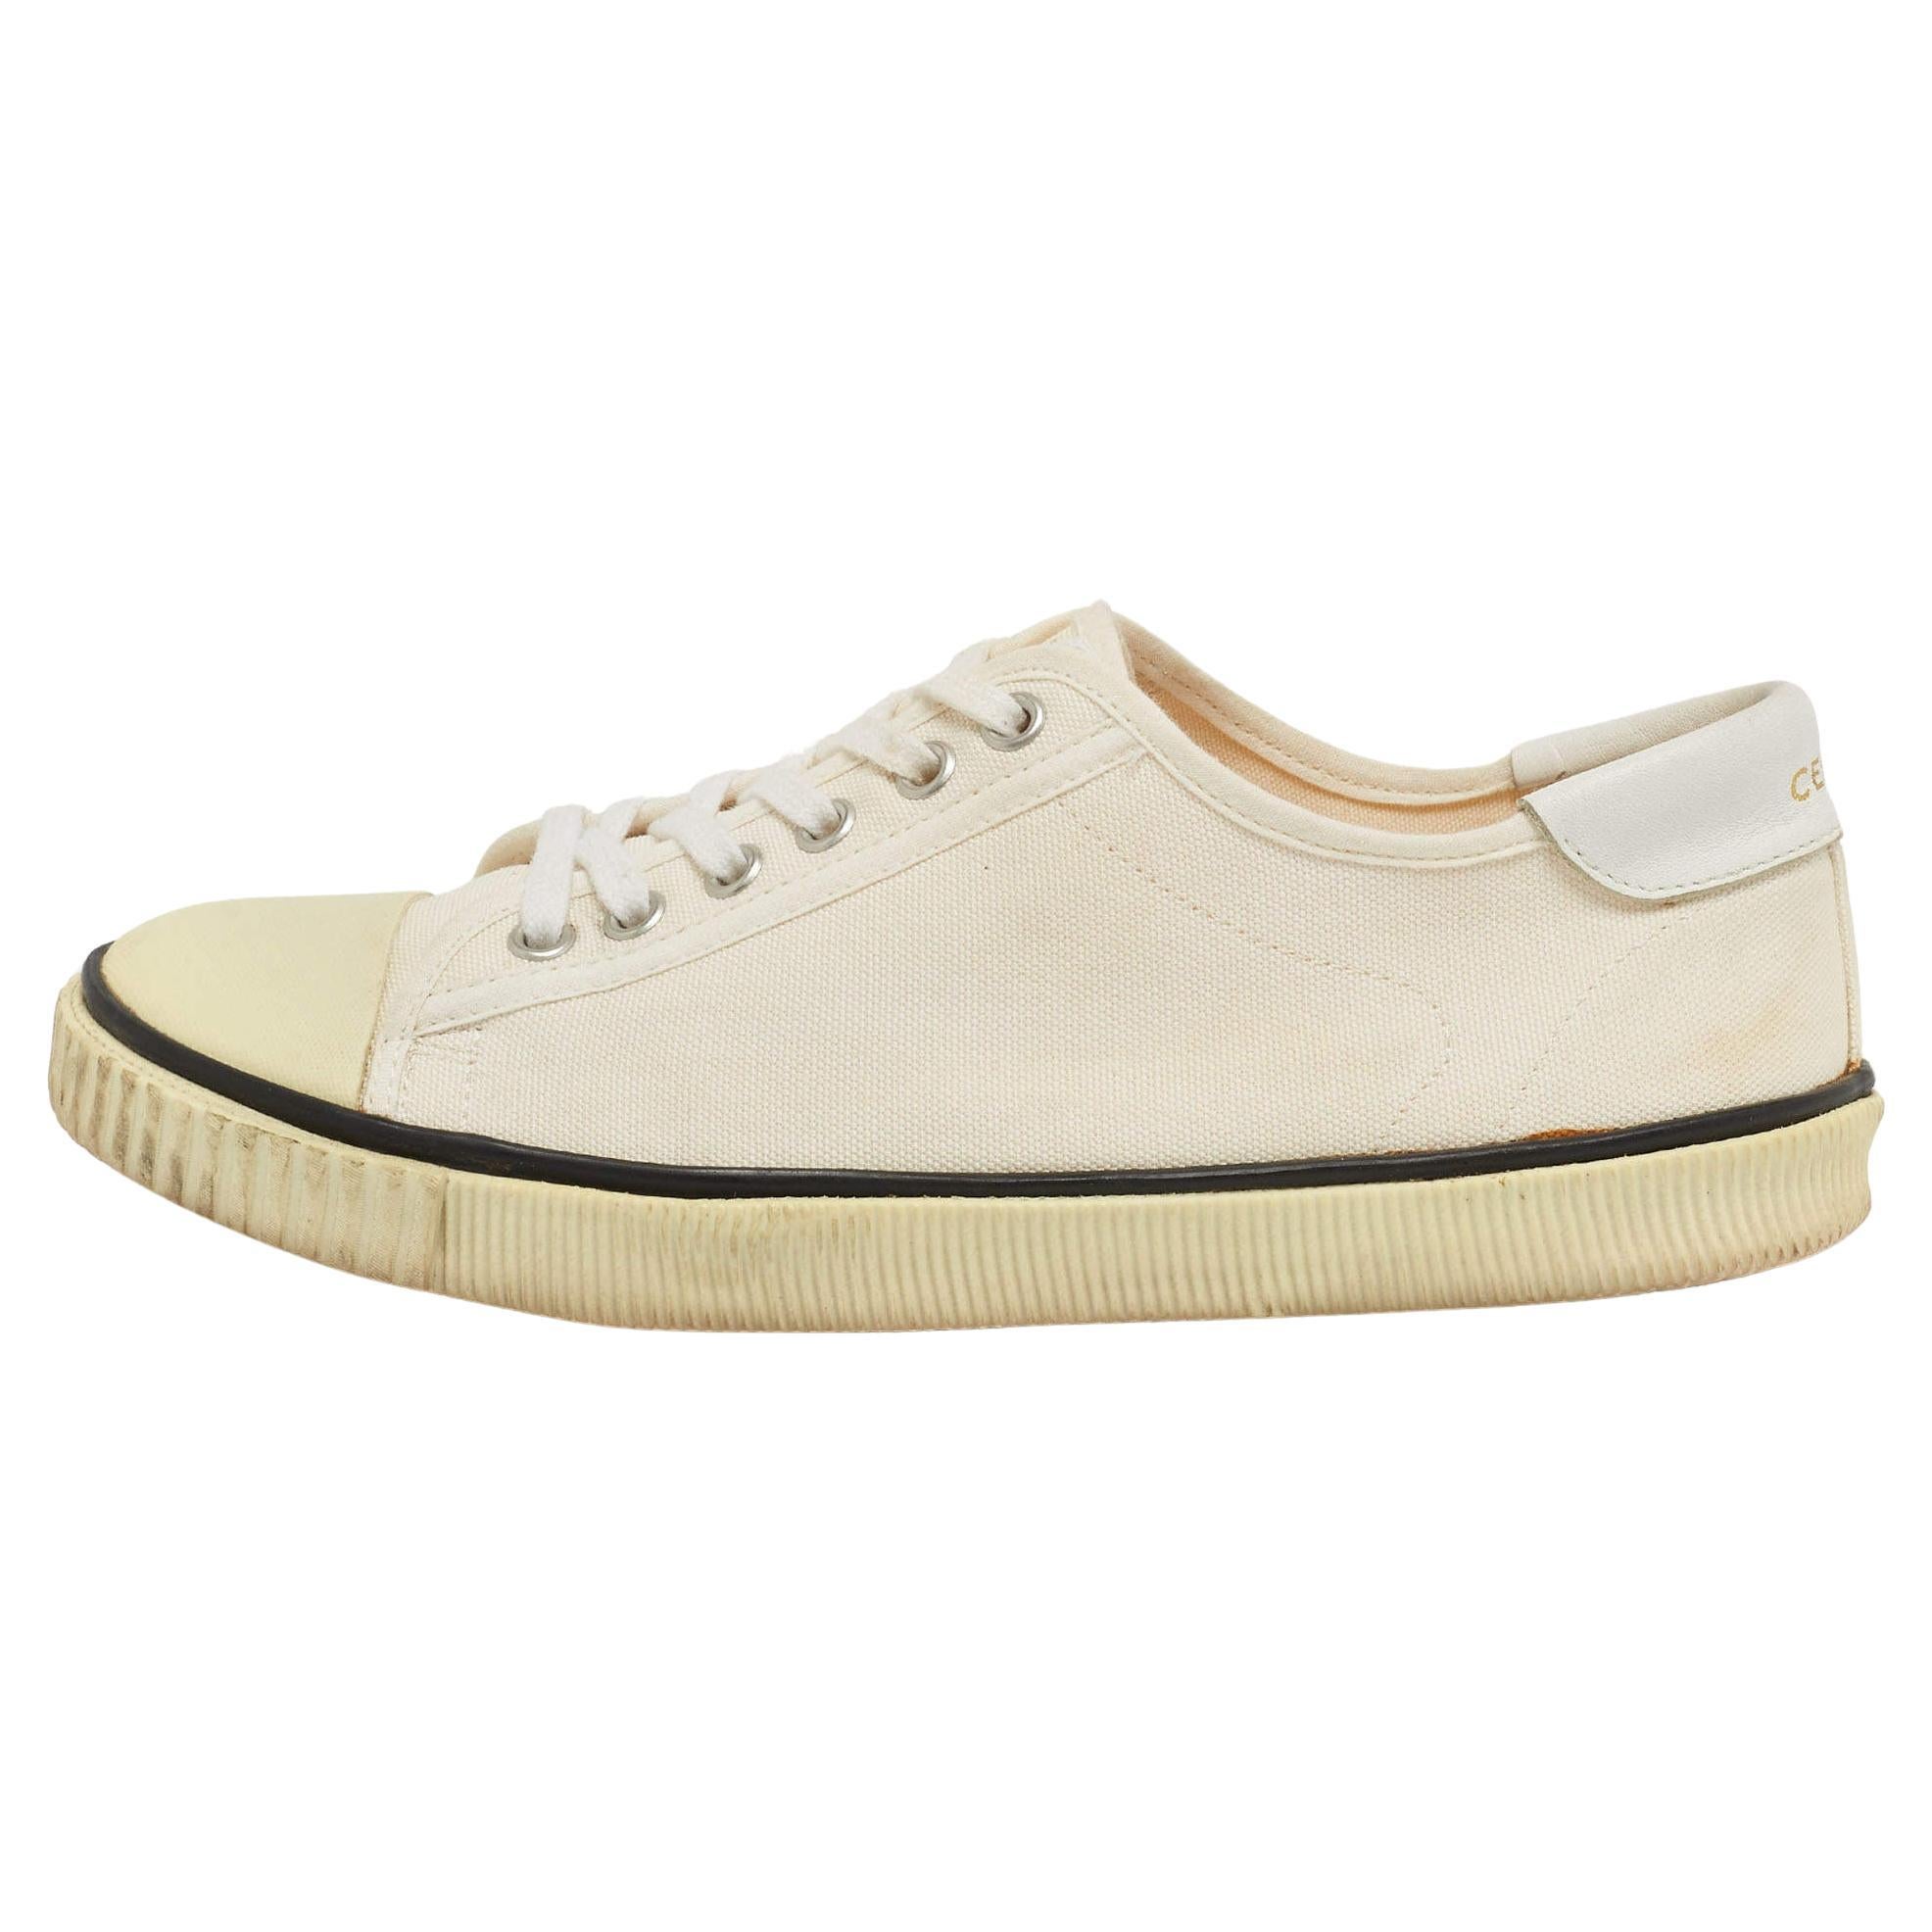 Celine Cream Canvas Blank Sneakers Size 38 For Sale